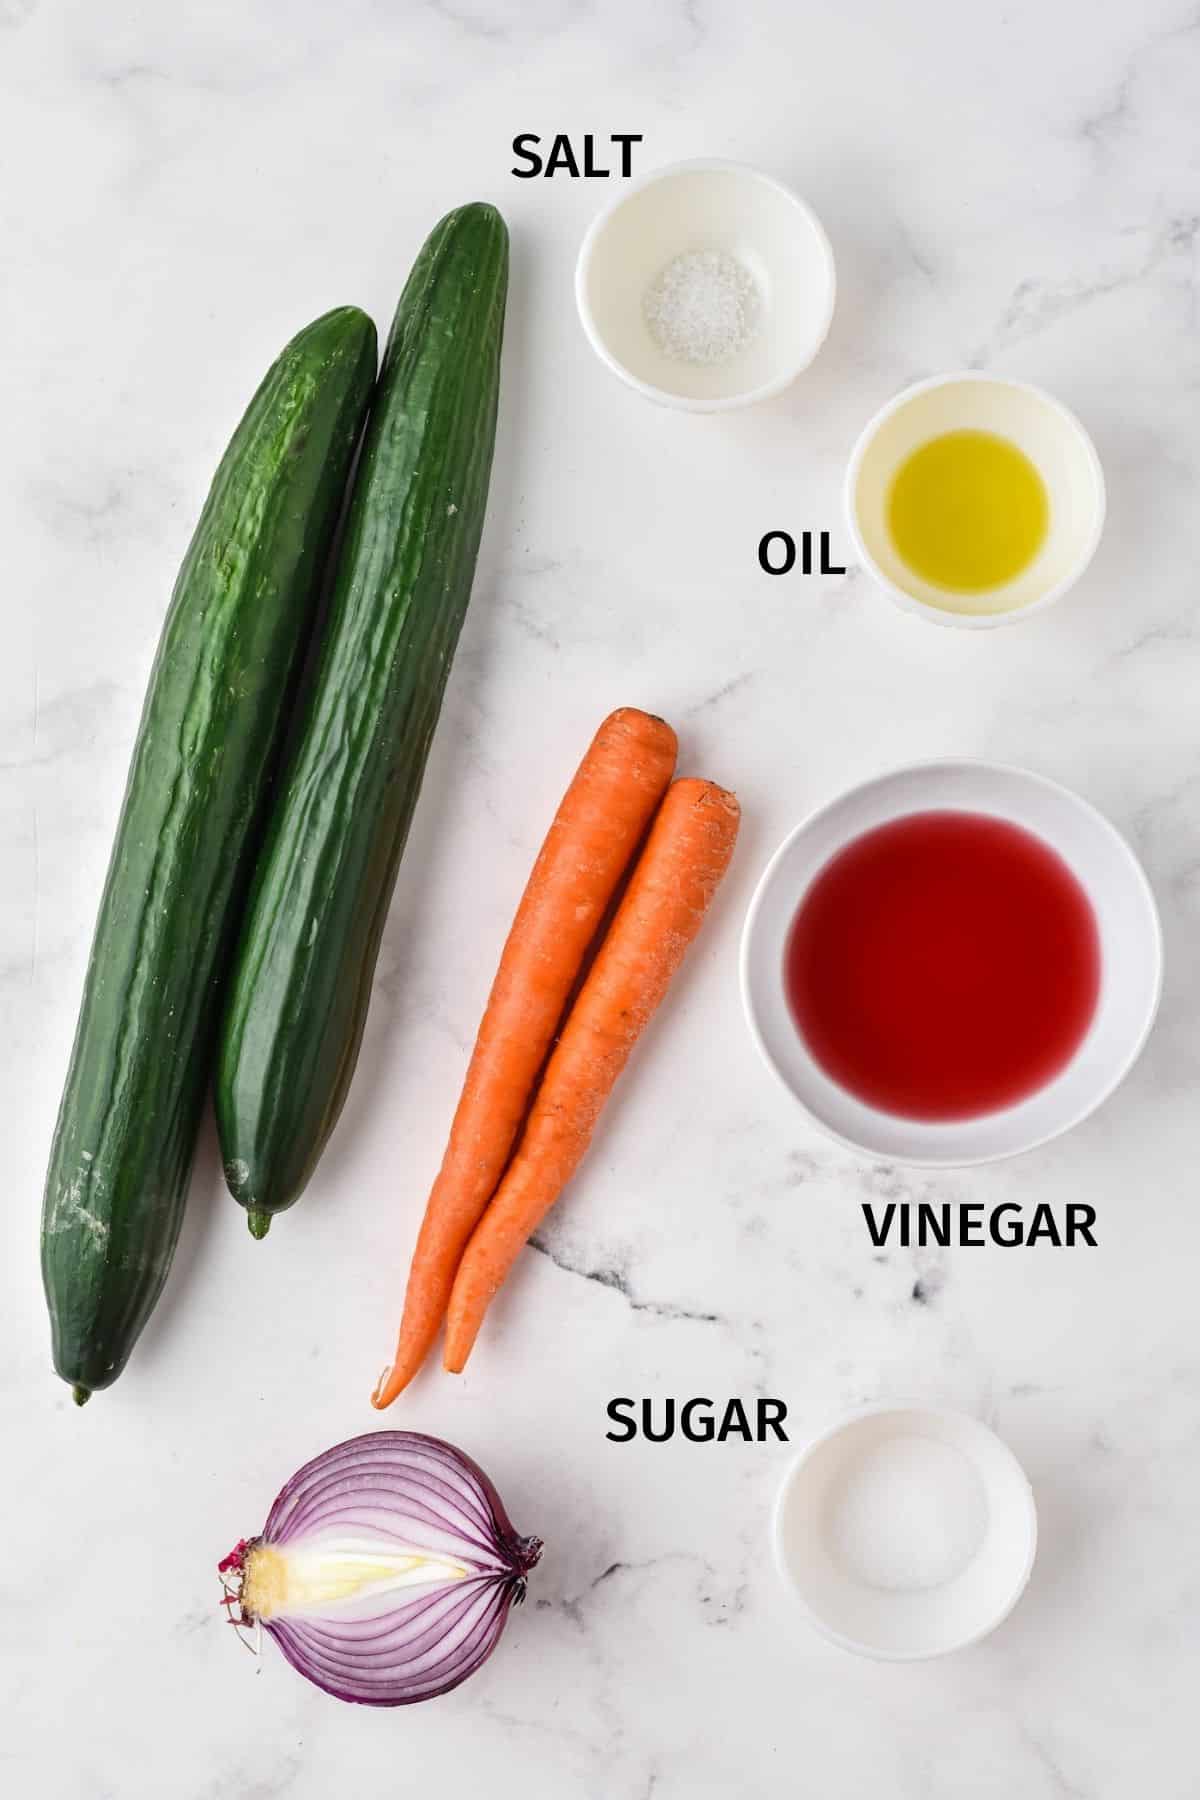 Ingredients for cucumber carrot salad in small bowls on a white surface.